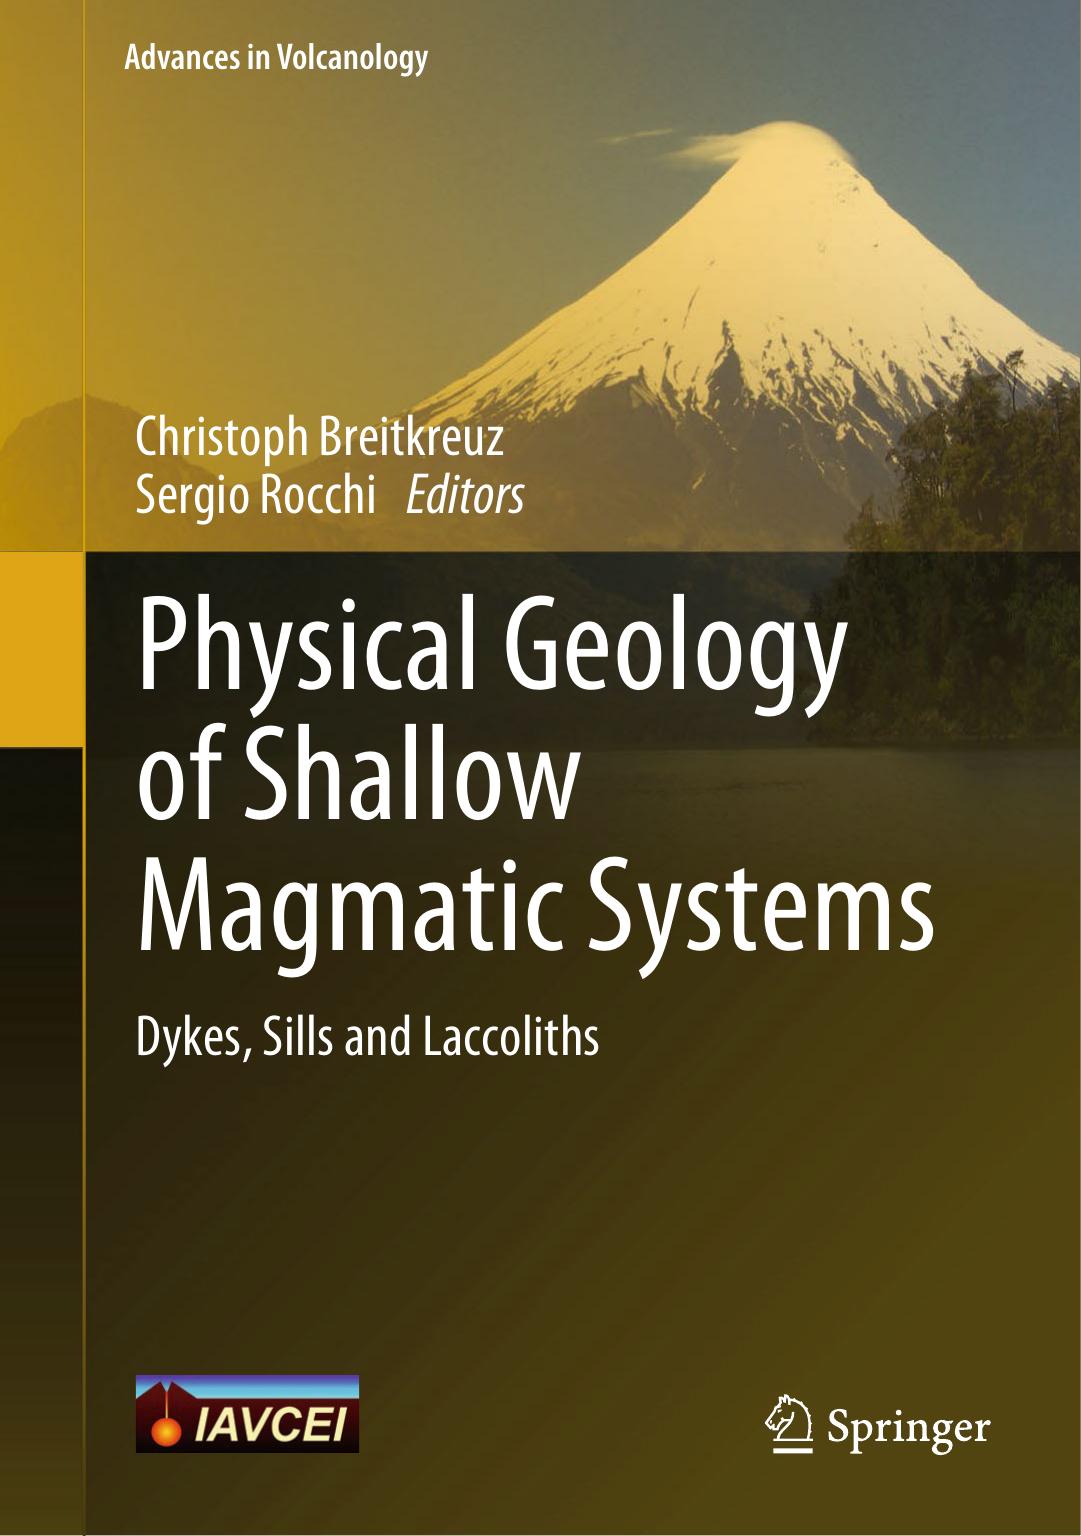 Physical Geology of Shallow Magmatic Systems 2018